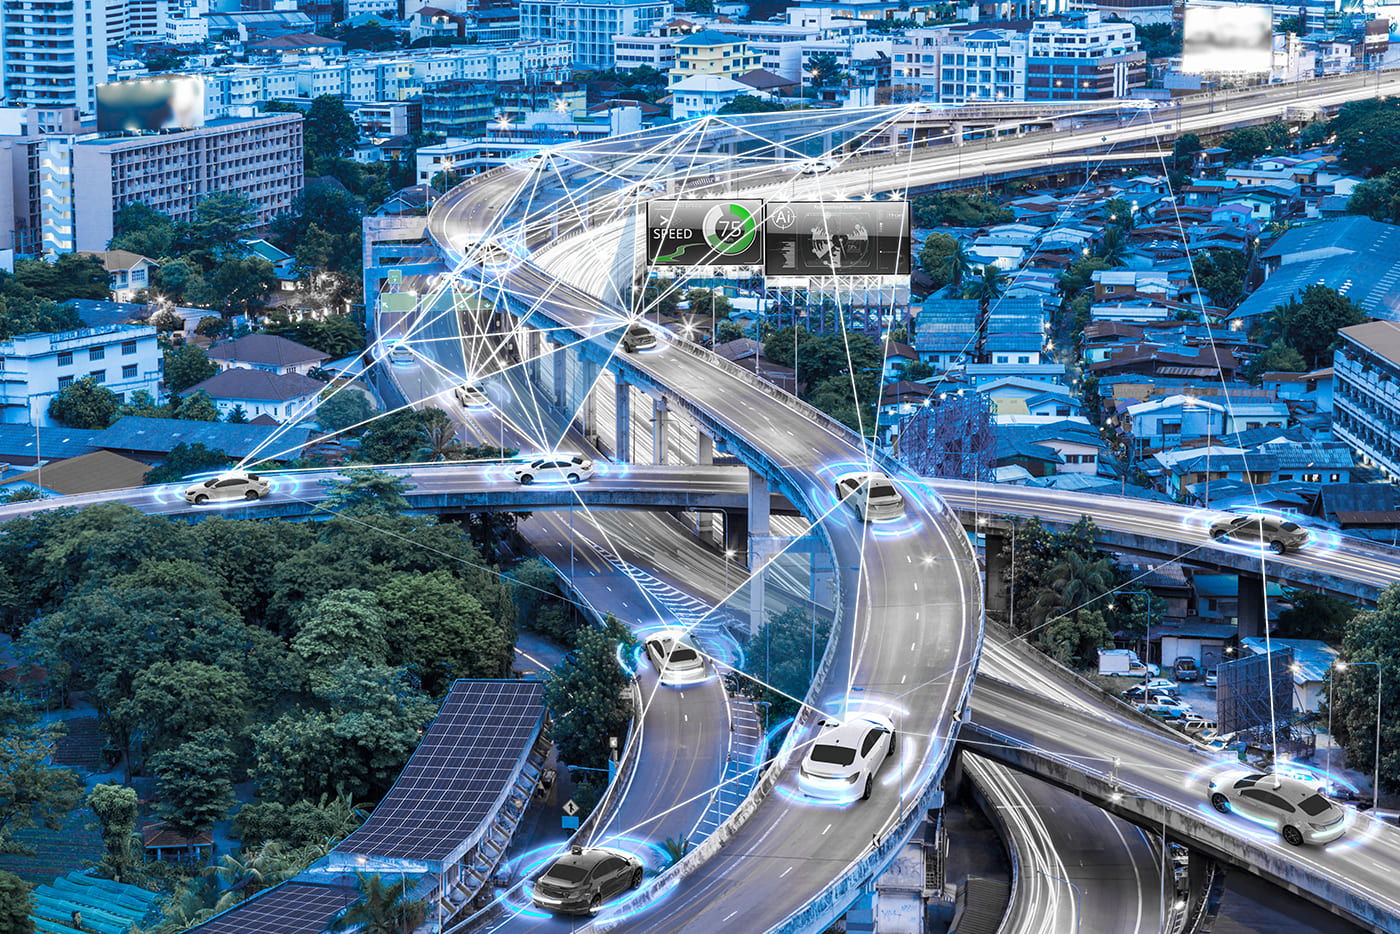 The Future Trends In Mobility And Transportation | Bernard Marr